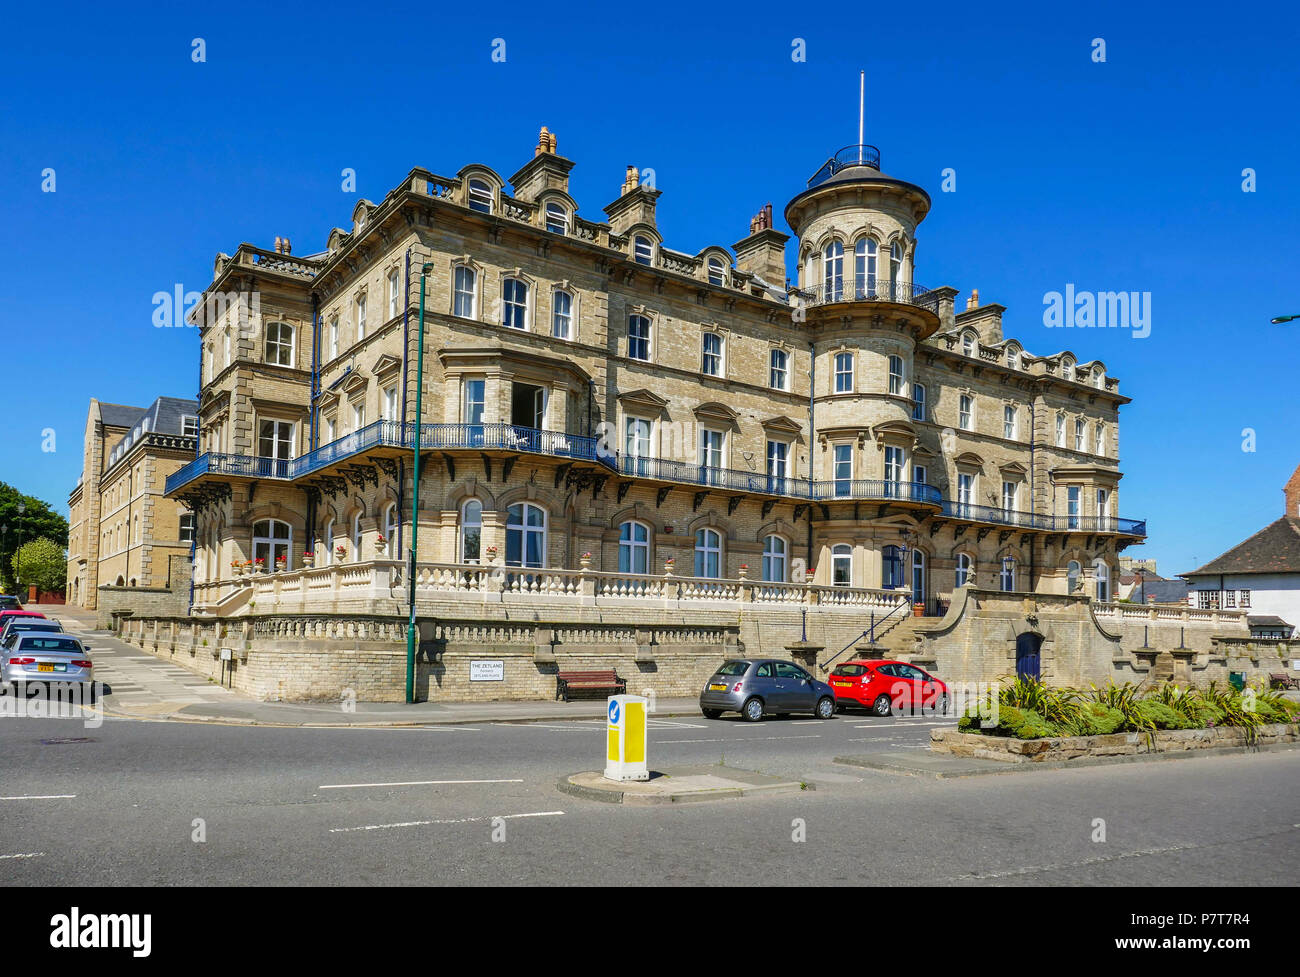 Impressive Victorian buildings, Zetland, in Saltburn by the Sea, family holiday destination, North Yorkshire, England, UK Stock Photo